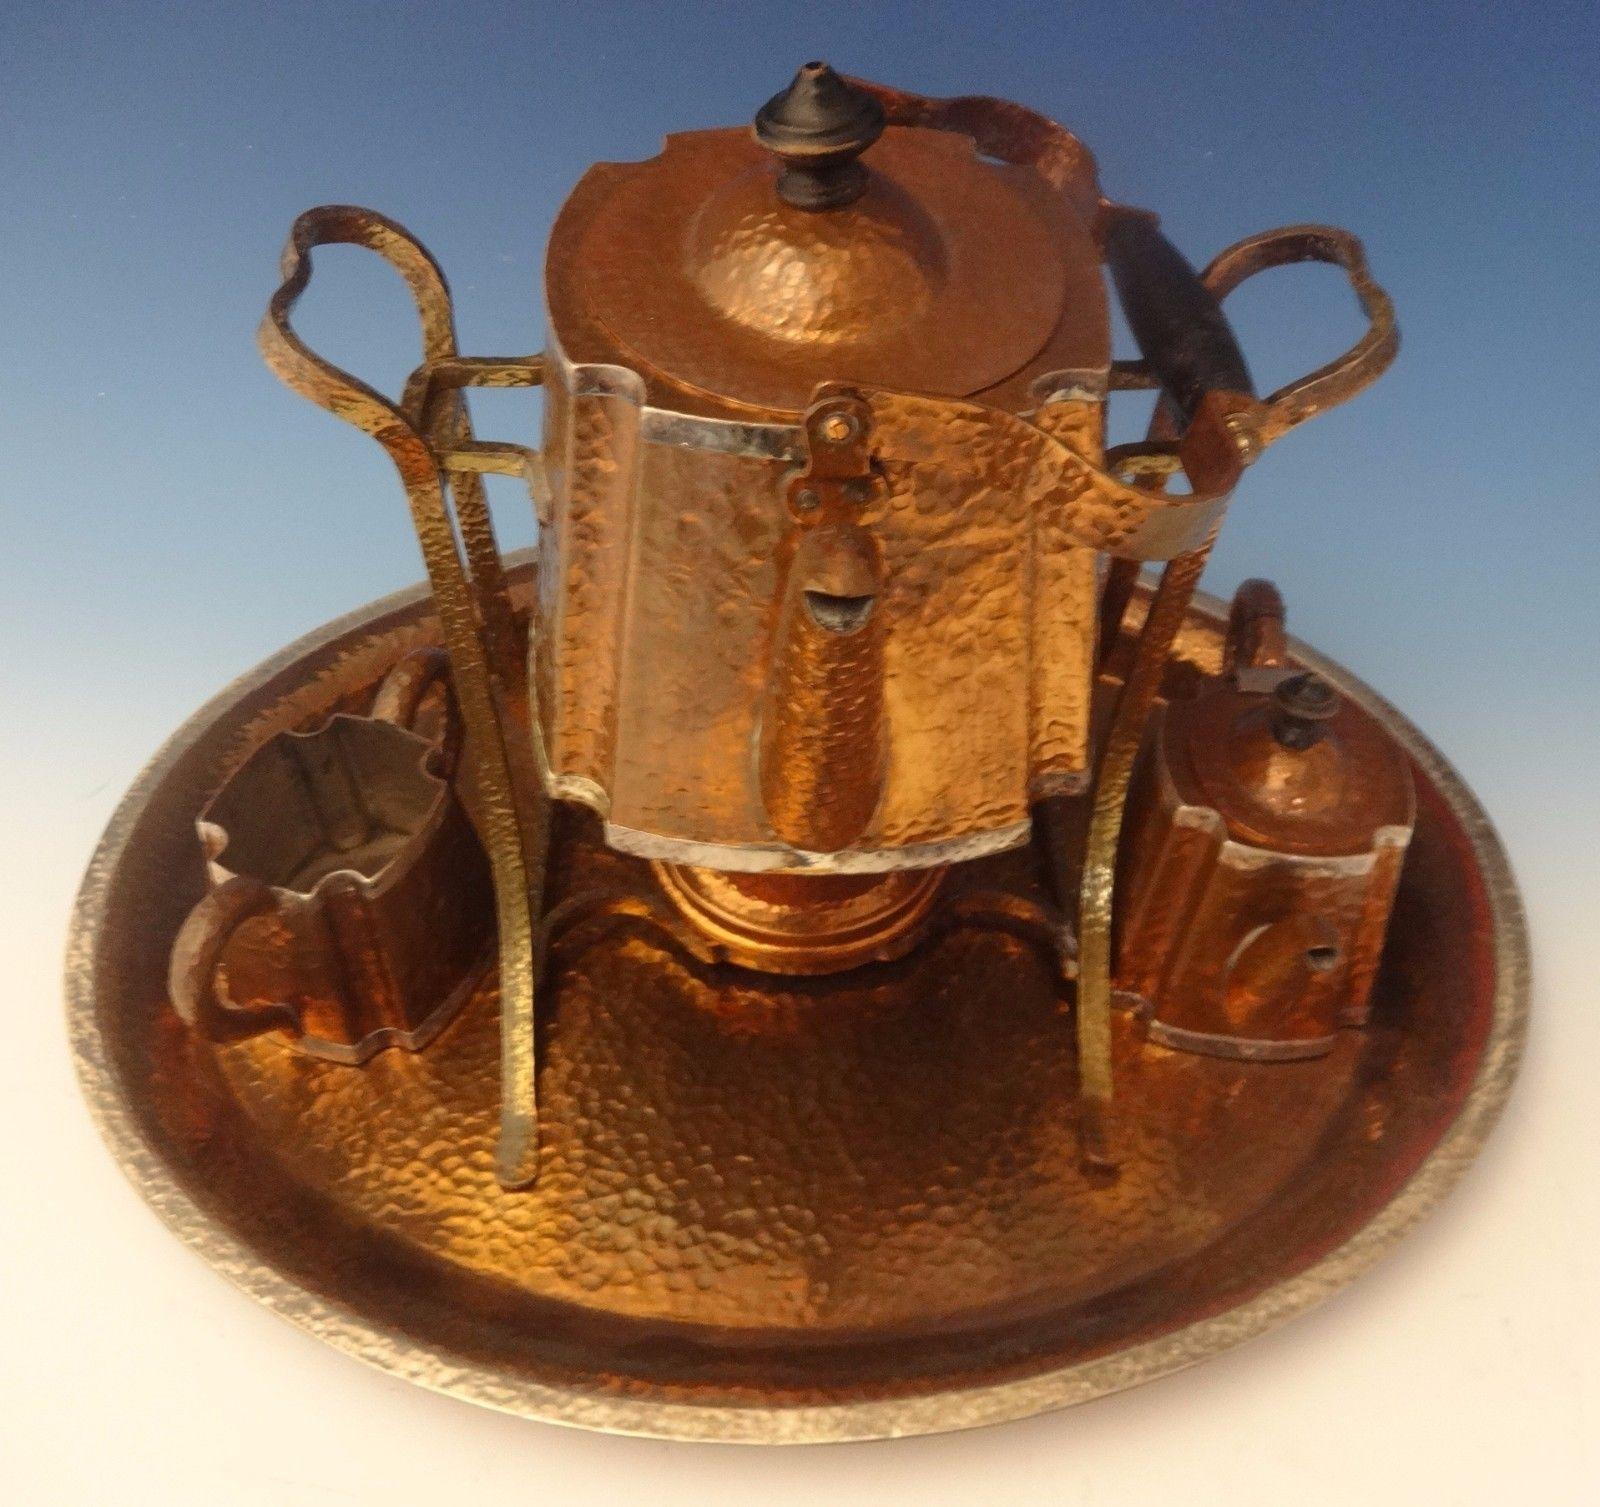 Joseph Heinrichs This very impressive Arts & Crafts 4-piece tea set was handmade by Joseph Heinrichs. It's made with hand-hammered copper with applied silver and brass. The set dates from circa 1905. The set includes: Tray: Measures 1 tall and 20 x